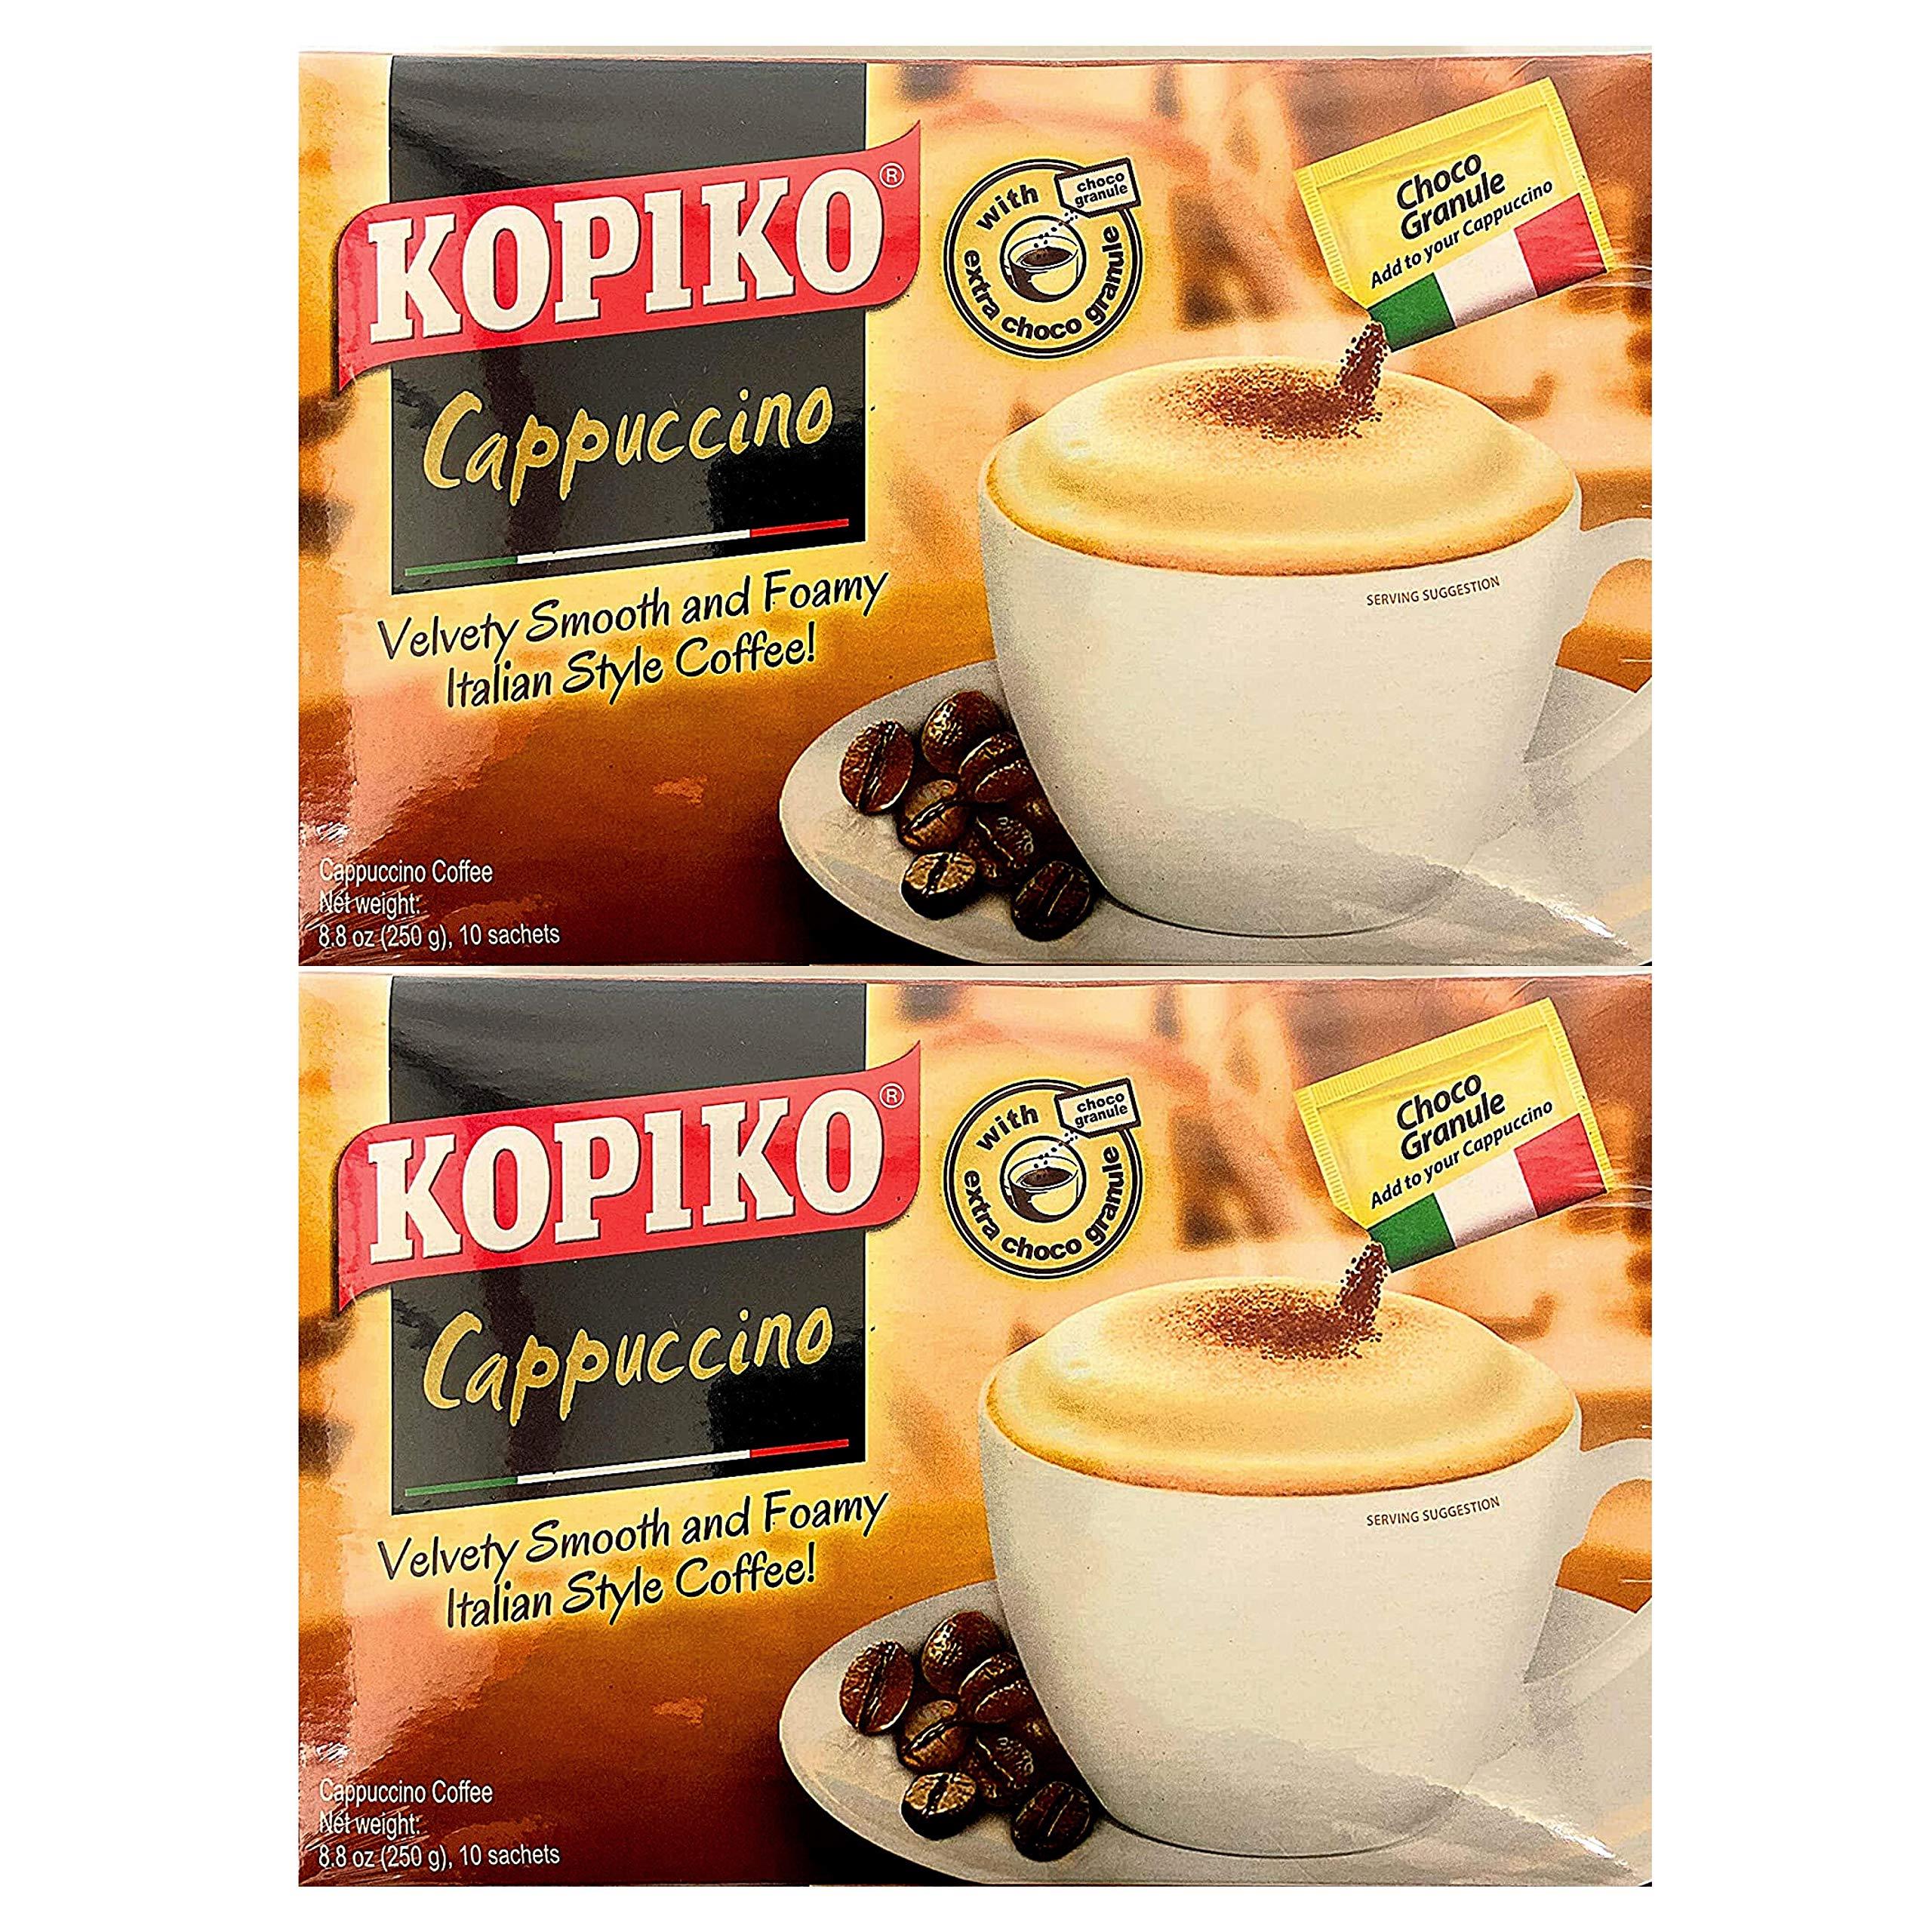 Kopiko Cappuccino Instant Coffee with Choco Granule (2 pack)